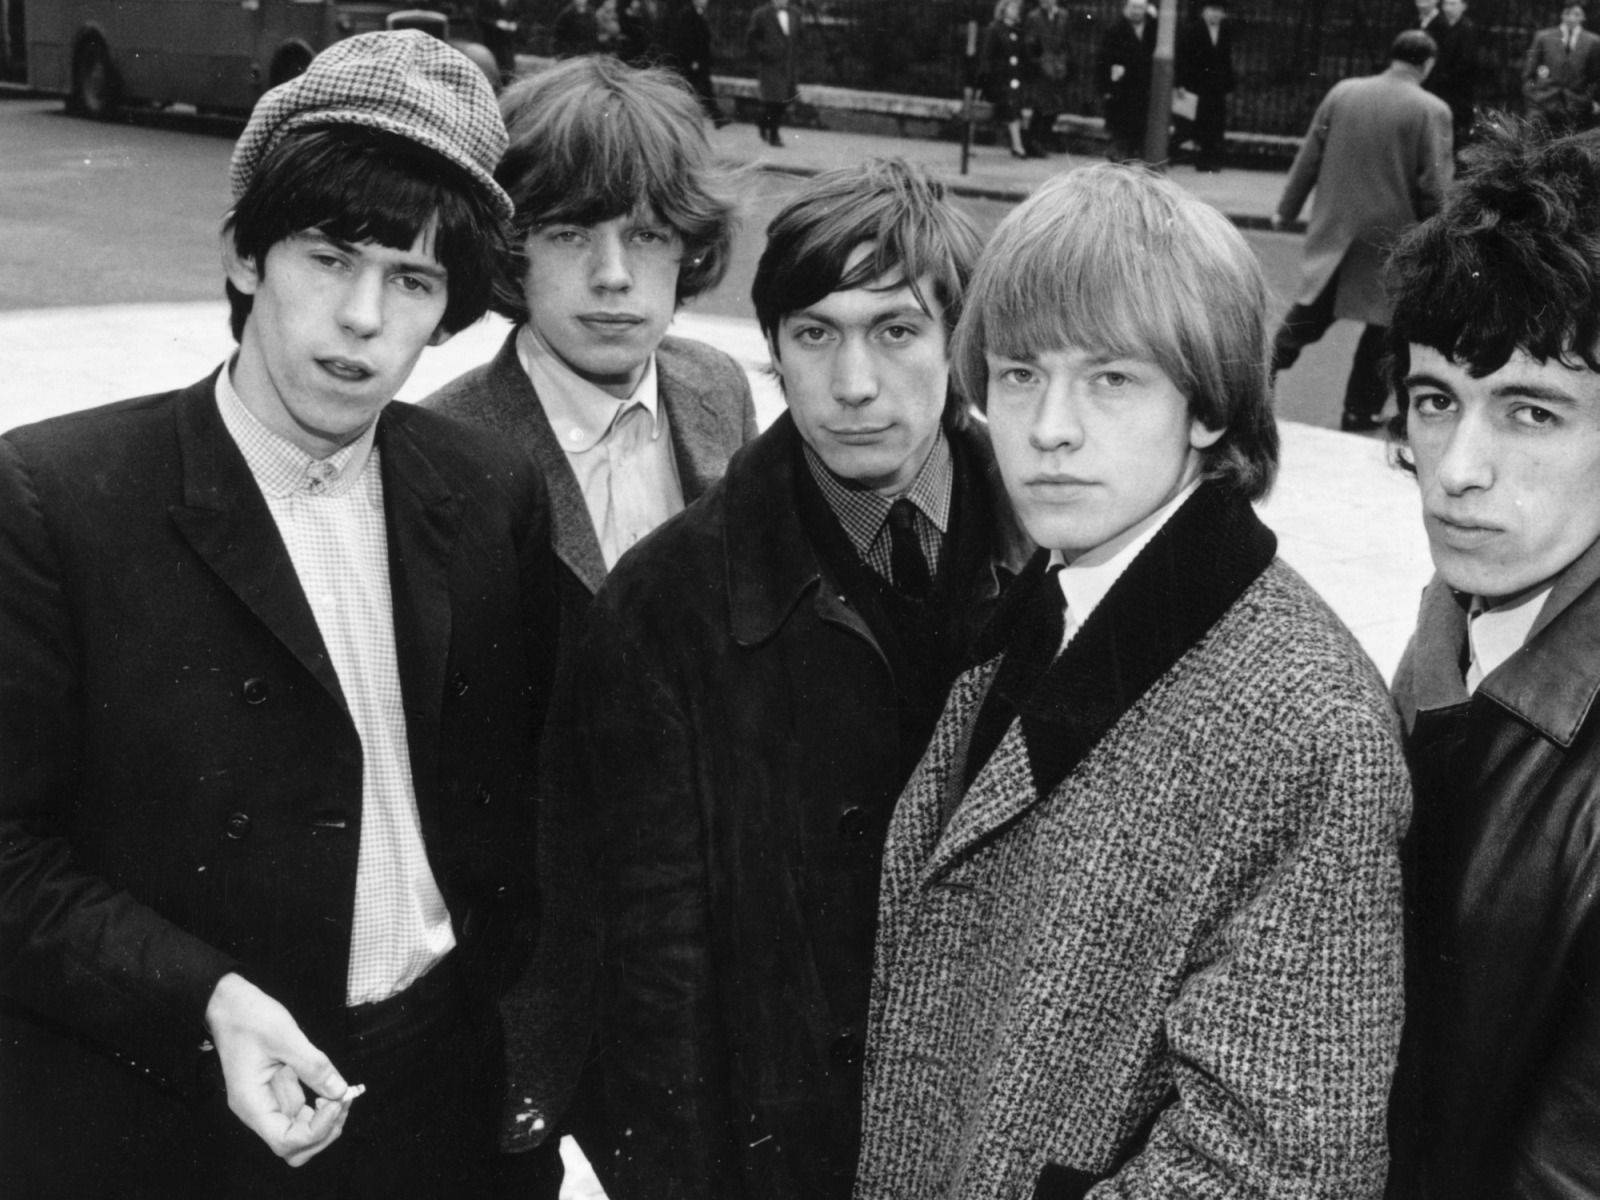 Vintage Snapshot Of The Rolling Stones